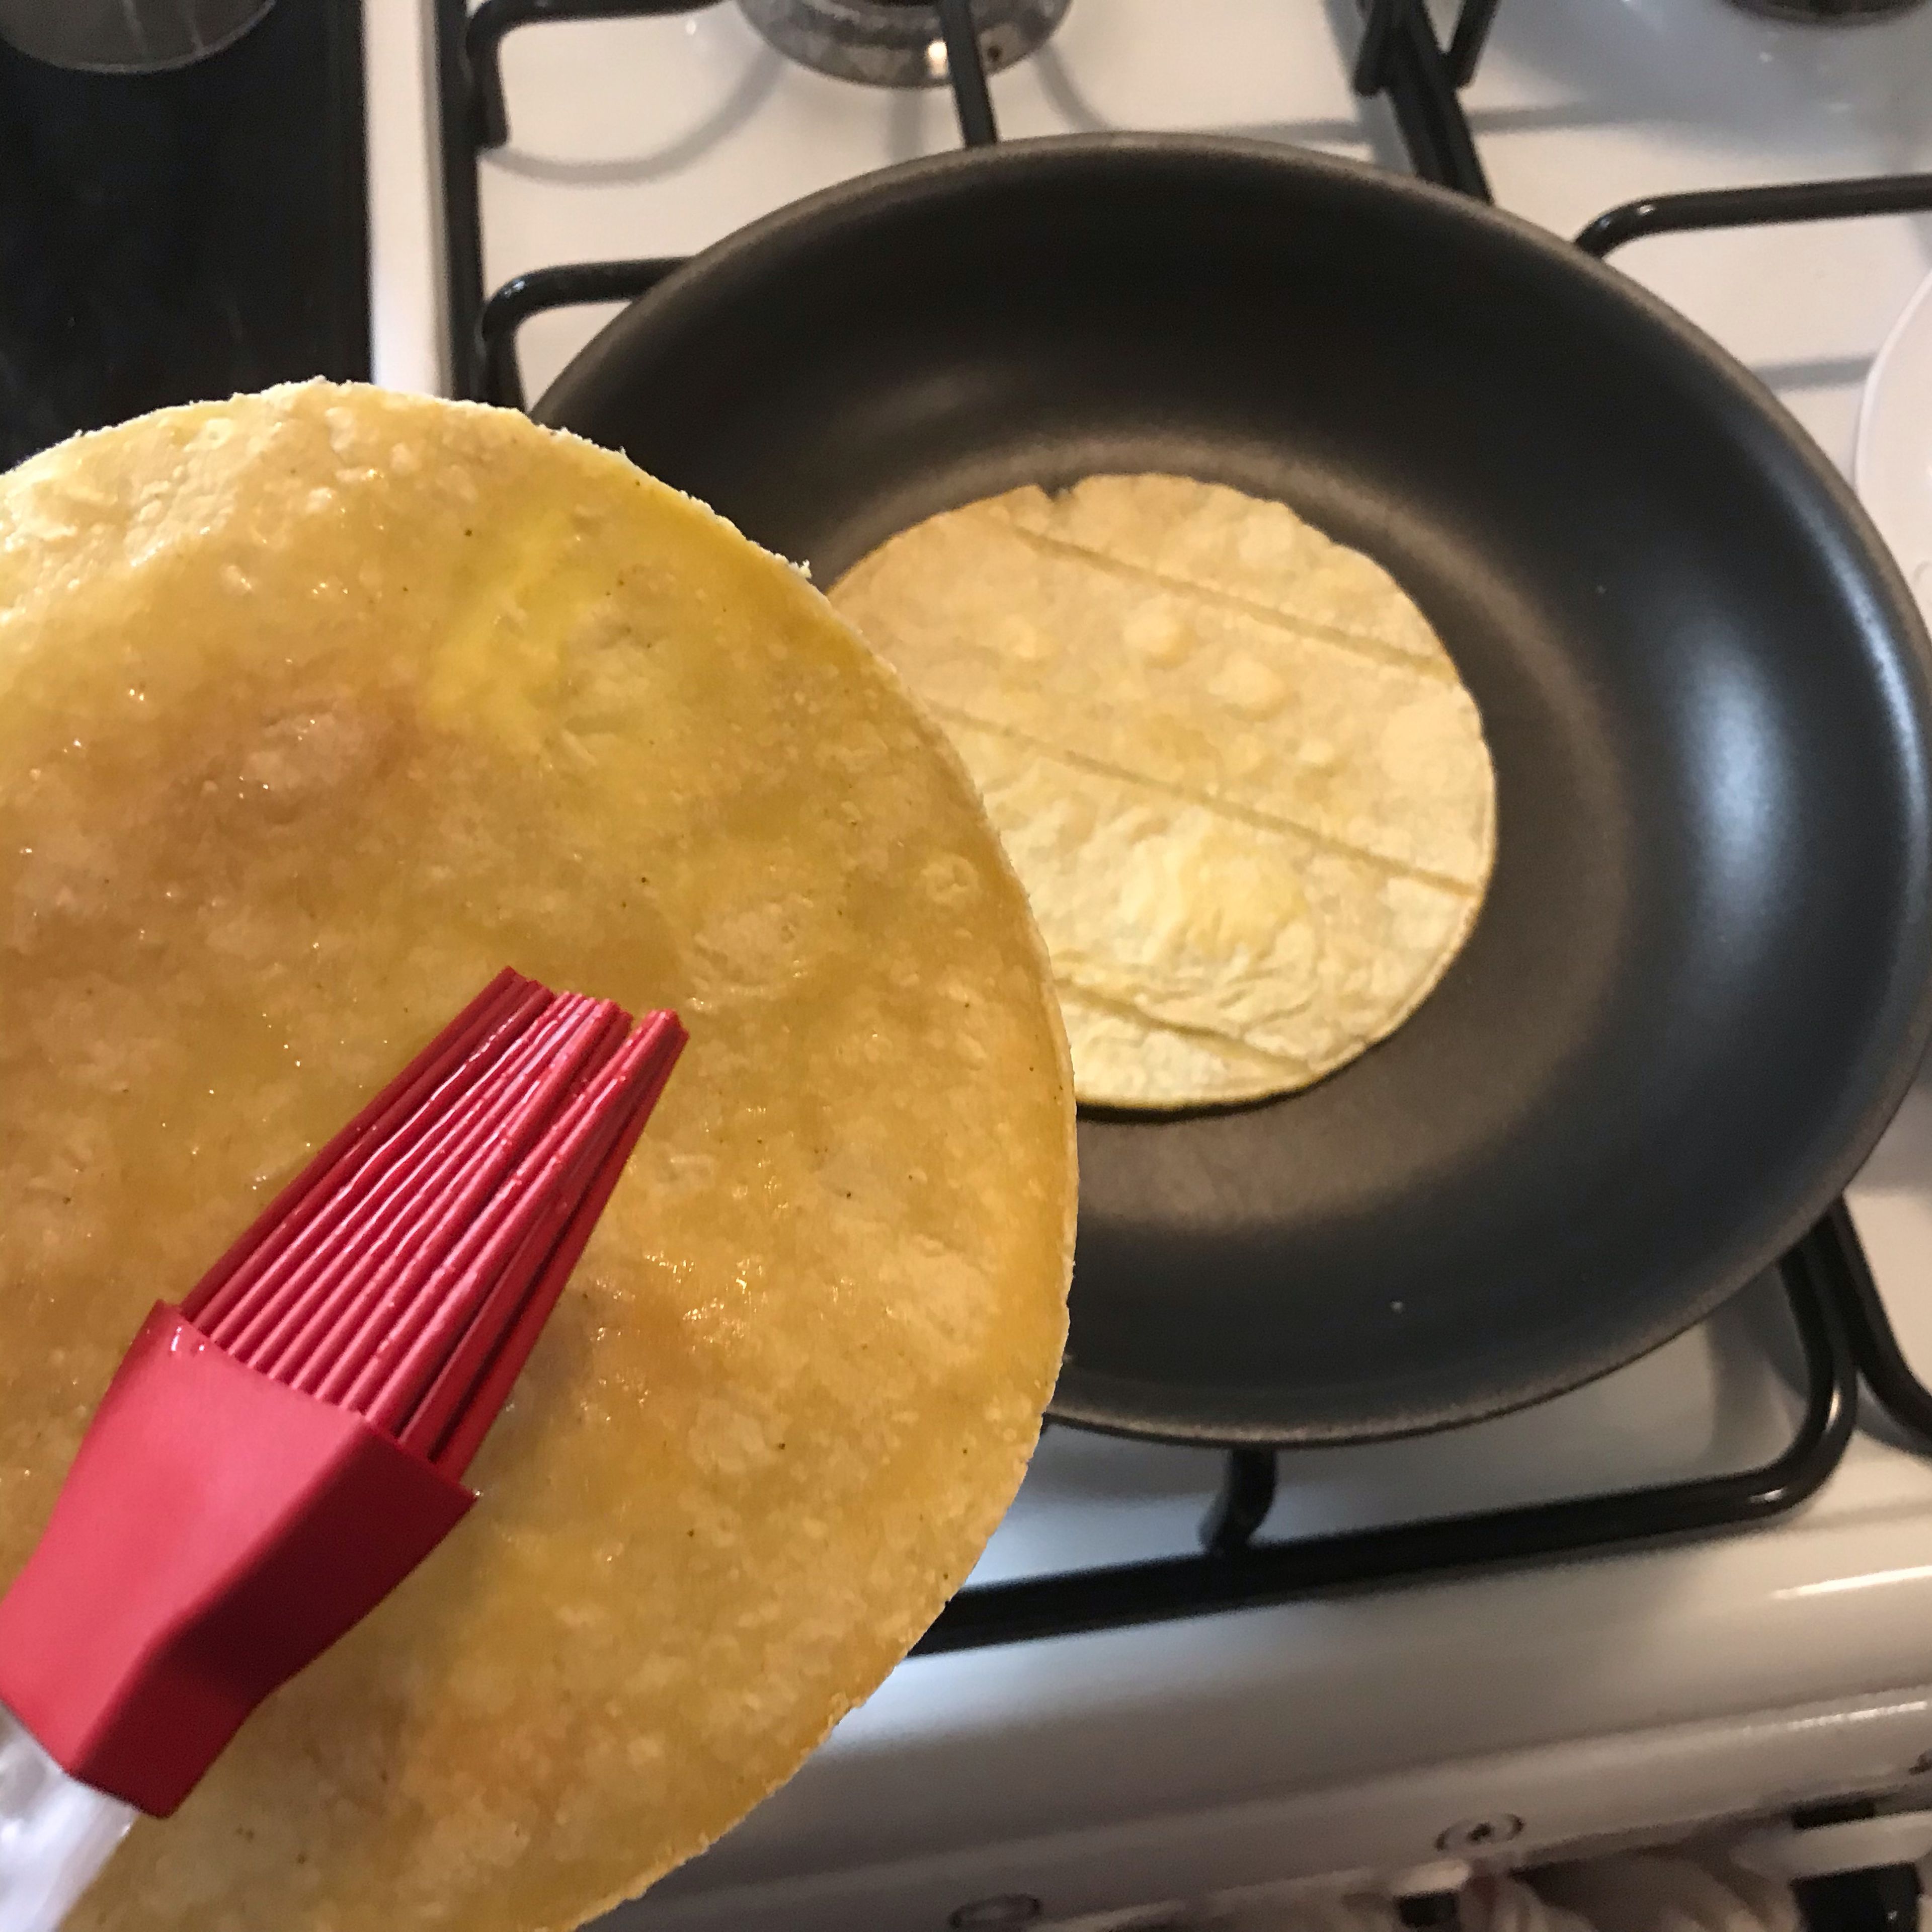 Warm the tortilla: Heat a non-stick skillet for 1 min. Put one tortilla in the pan and heat up each side for about 45 sec-1 min until the tortilla feels dryer and hardened. Repeat until all 3 tortilla are heated. OR, if you want to use oven it’s even better, warp them (up to 6 in one stack) in aluminum foil and to heat up at 350F for 10-12 min while doing next steps. Because I’m only making 3, I use the pan to do it quick and save energy.